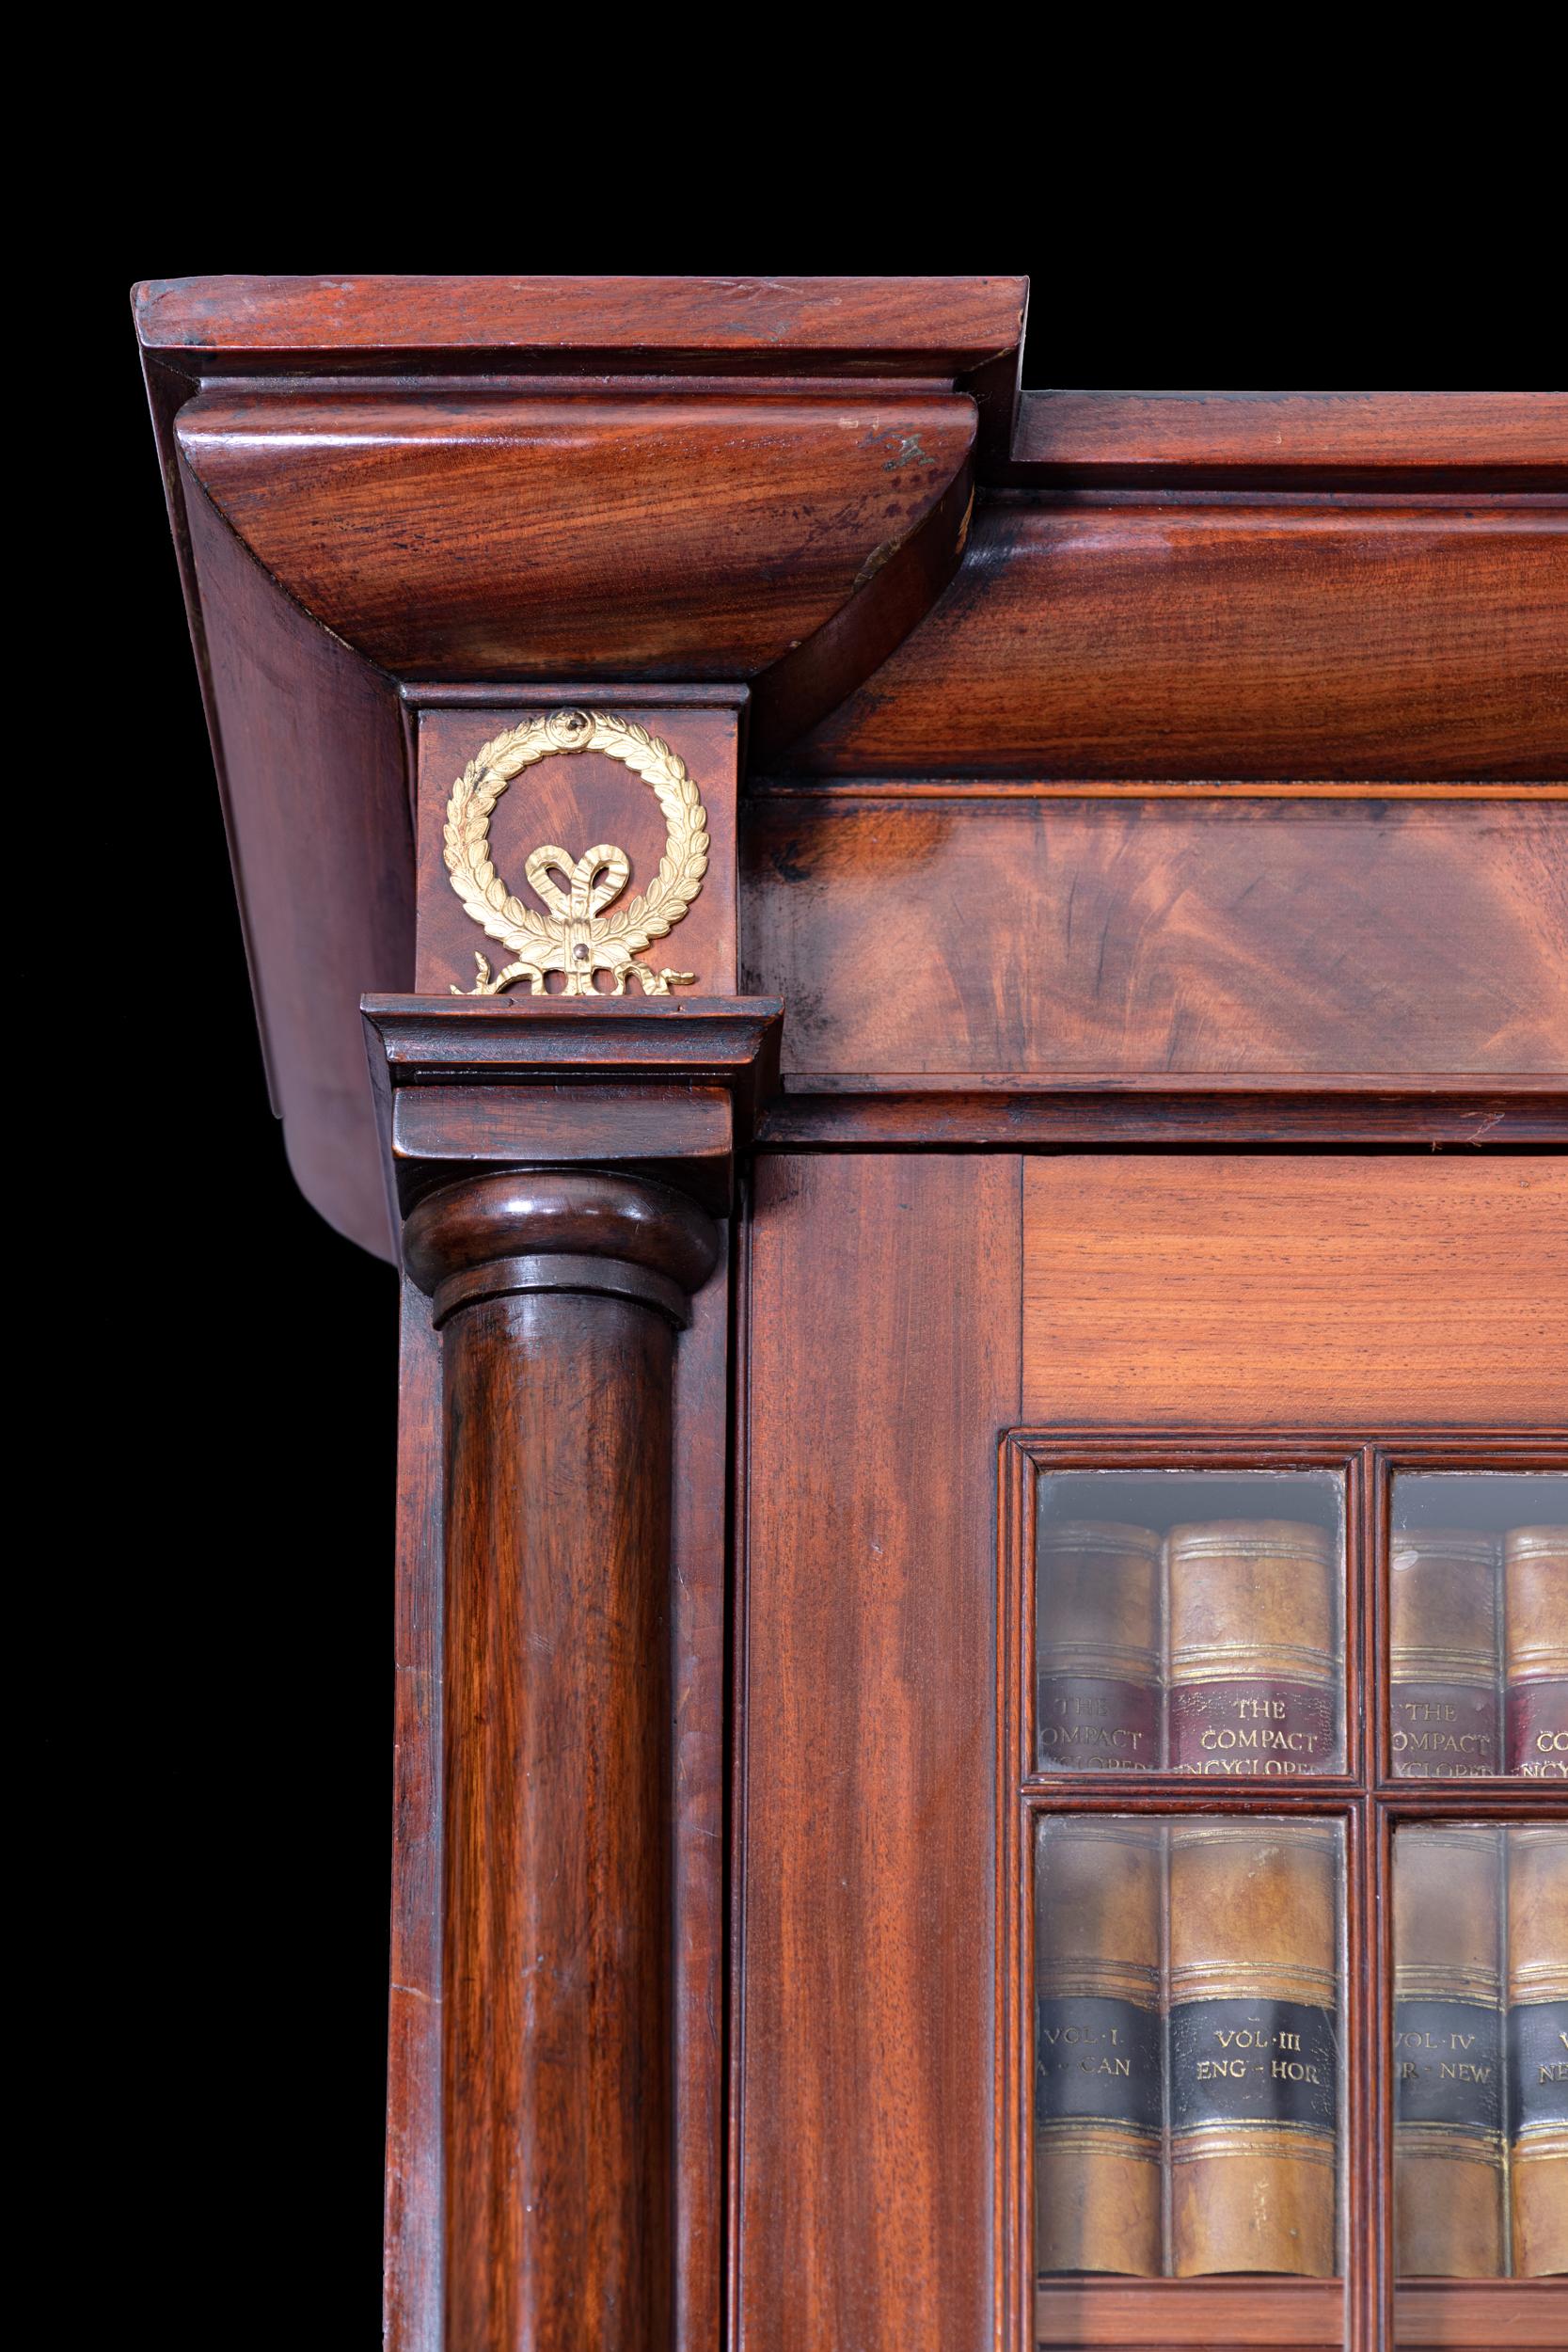 English Pair of Early 19th Century Mahogany Bookcases Attributed to Gillows of Lancaster